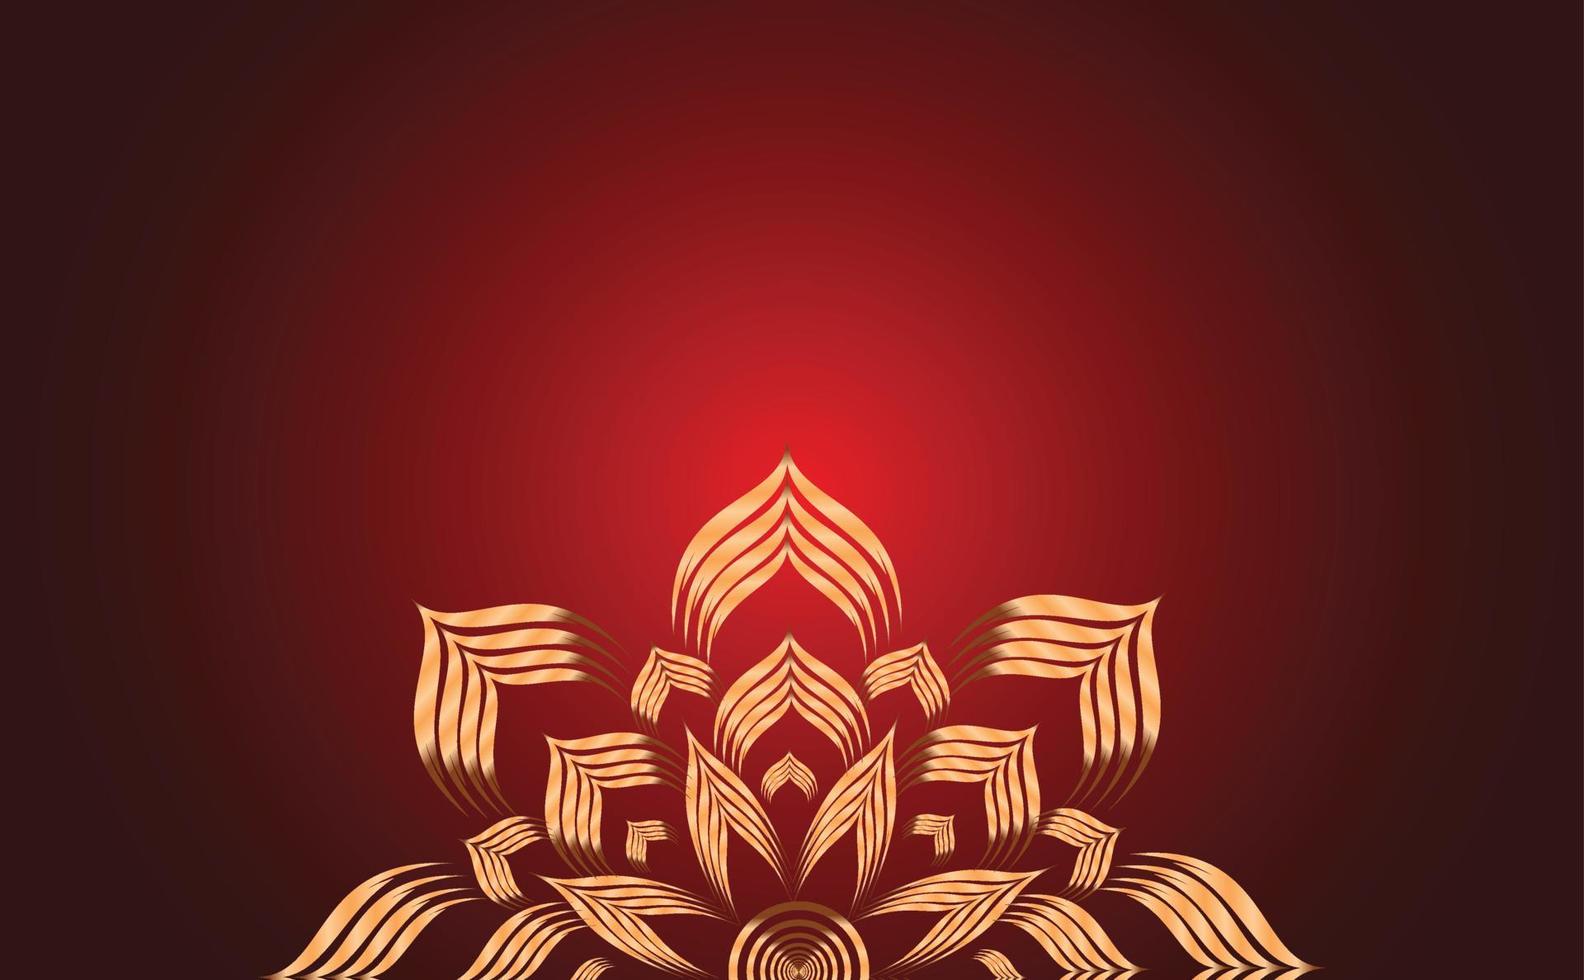 Ornamental background design. Background with golden floral ornaments. red background design vector